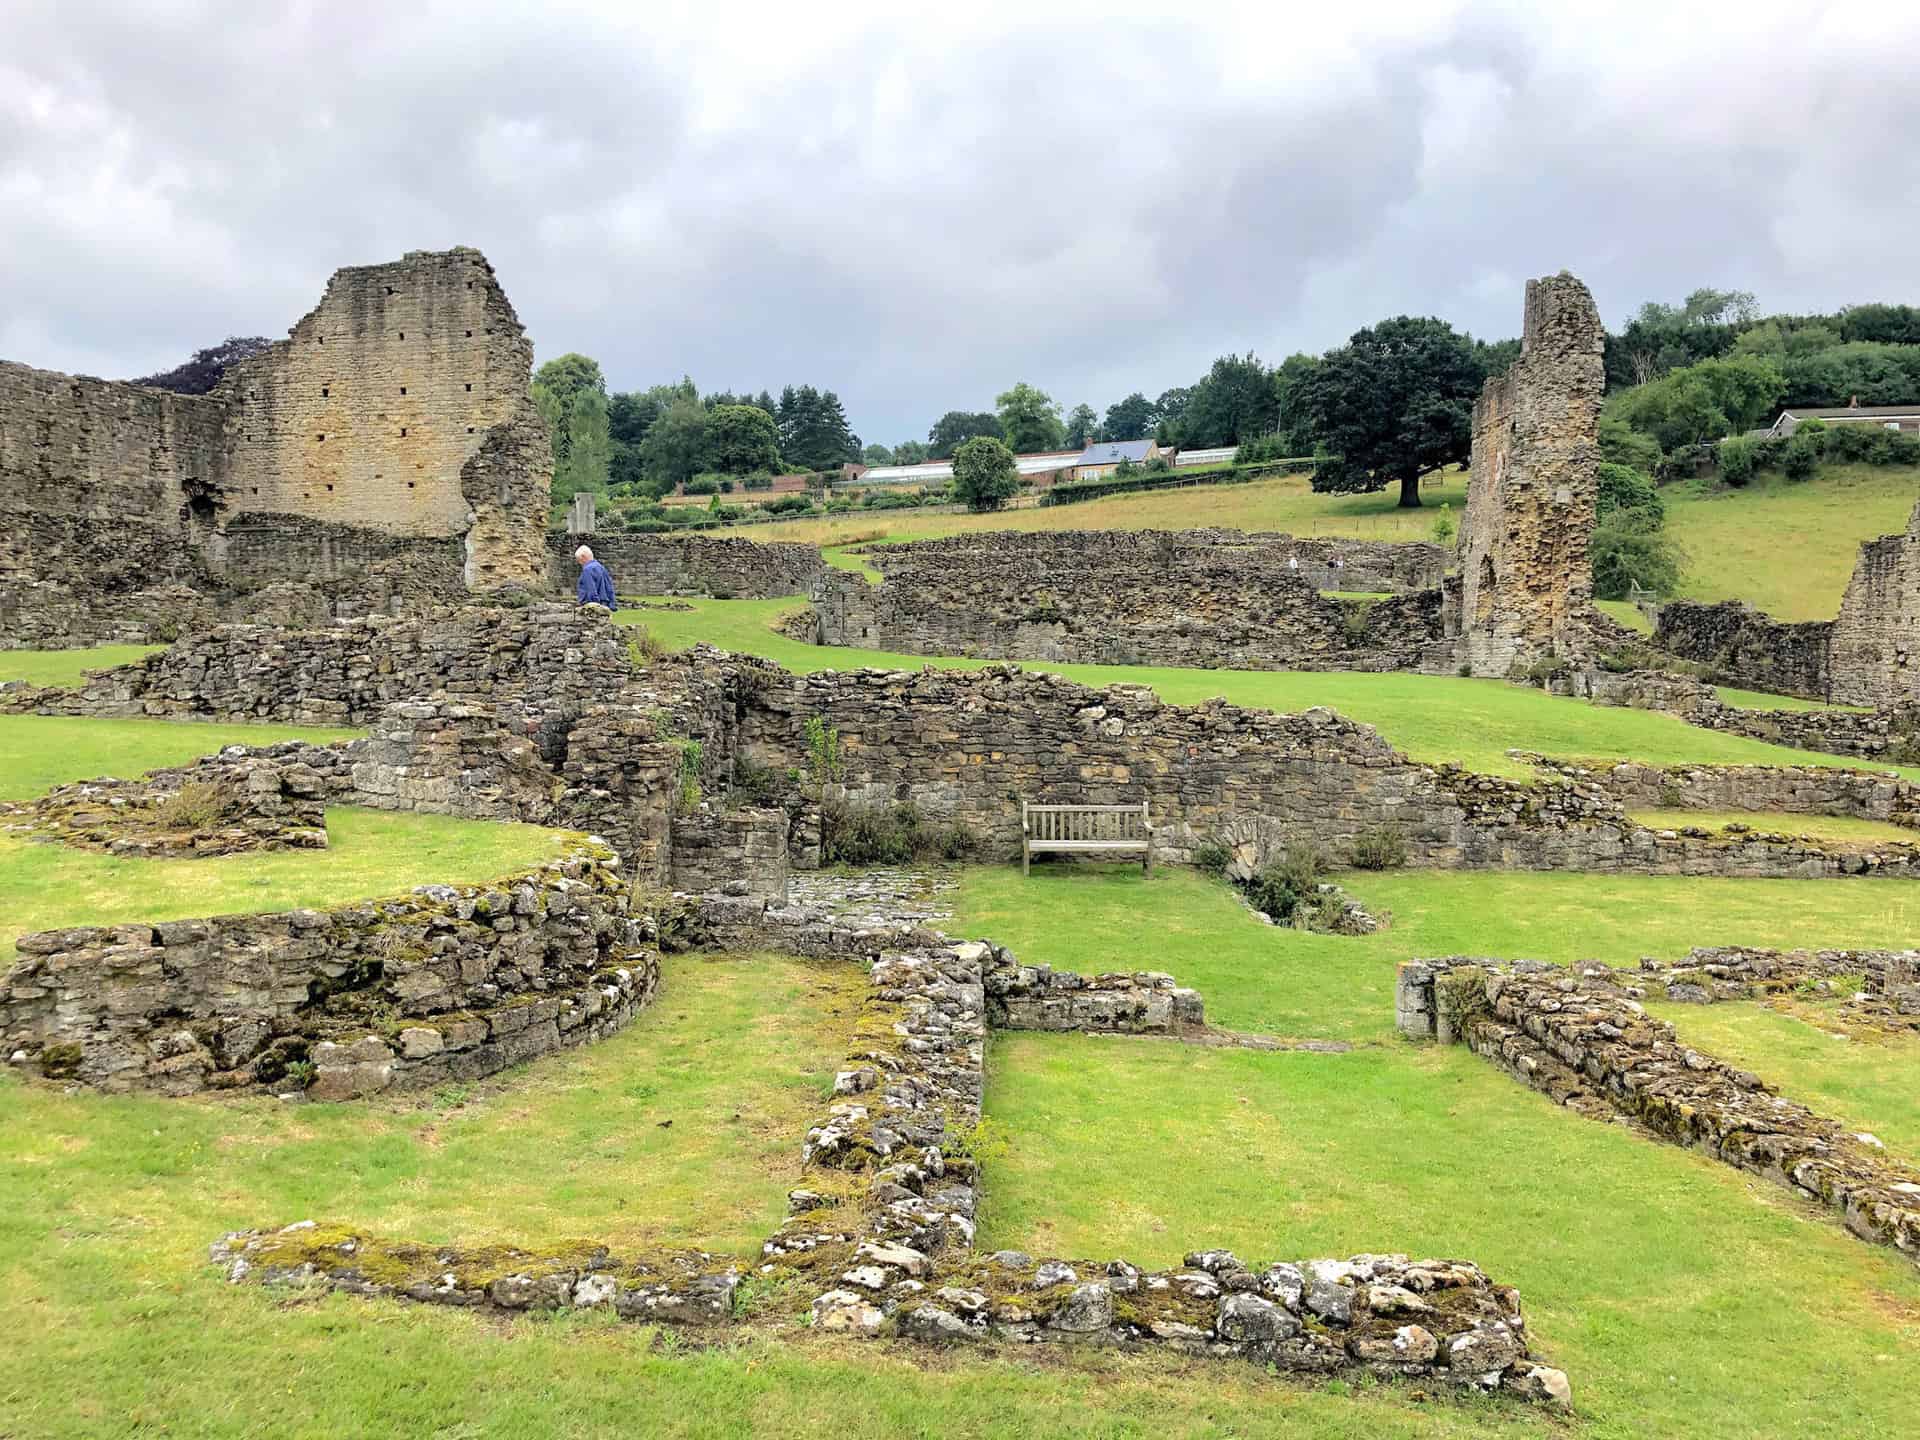 The priory was founded in 1122 by Walter l'Espec, Lord of Helmsley, for canons of St Augustine. Though they lived a communal life the Augustinian canons were not regarded as monks and were all ordained as priests.